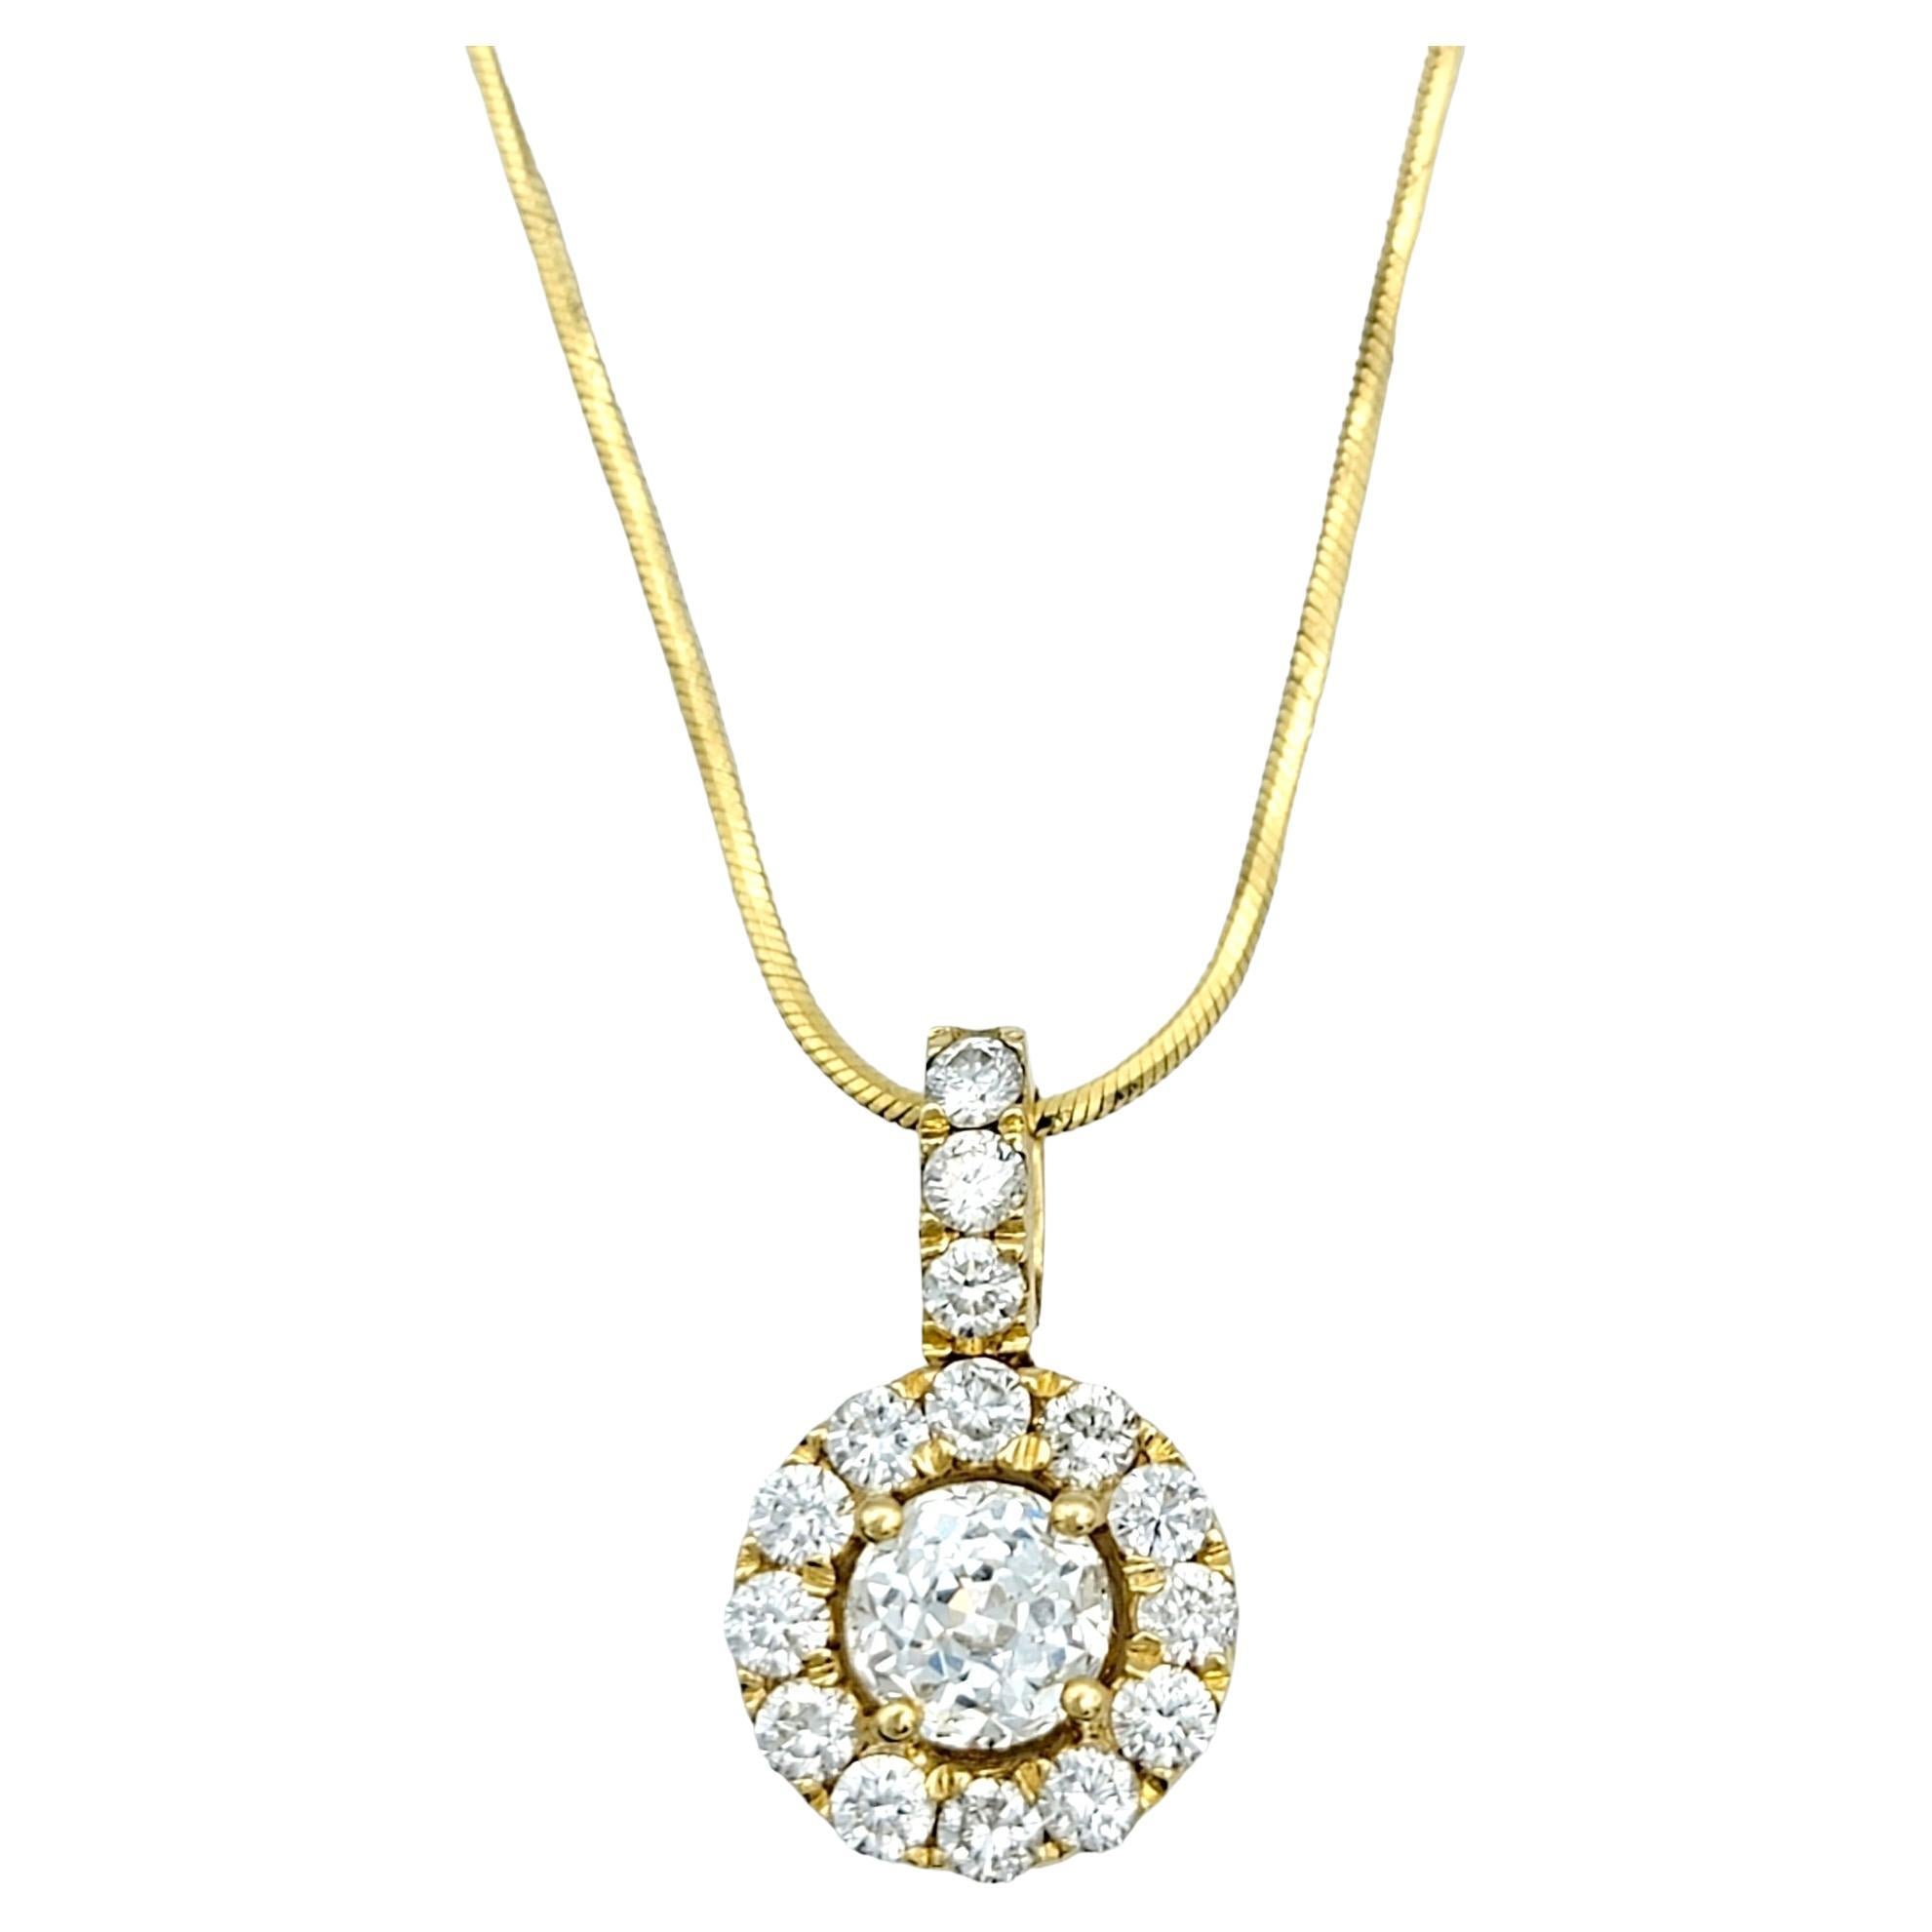 Crown of Light and Round Diamond Halo Pendant Necklace with Snake Chain 14K Gold